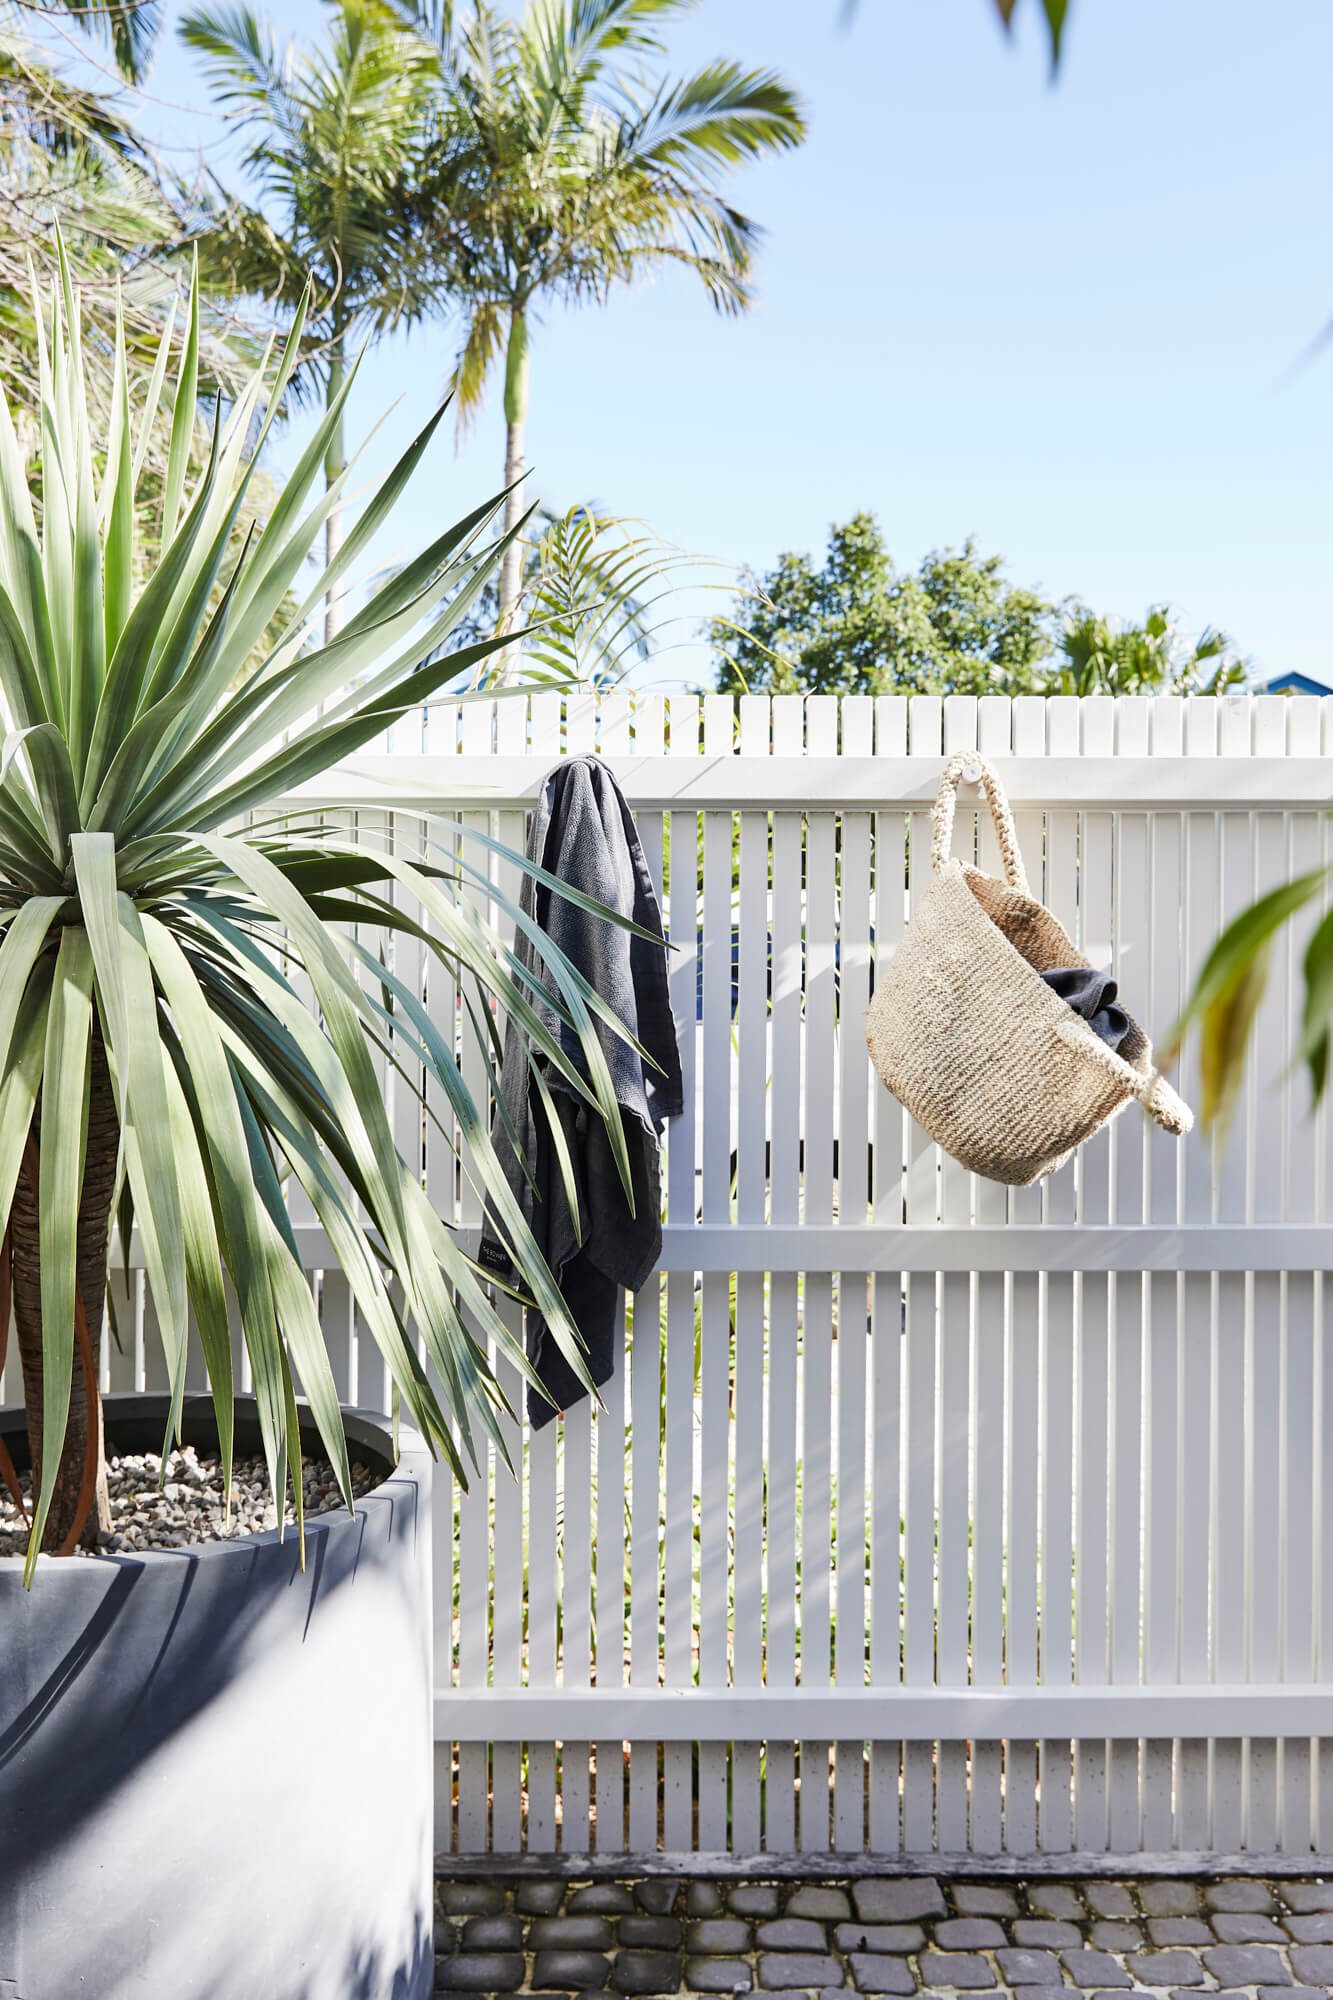 Woven beach bag and towel hanging on fence at the Bower Barn, The Bower Byron Bay hotel